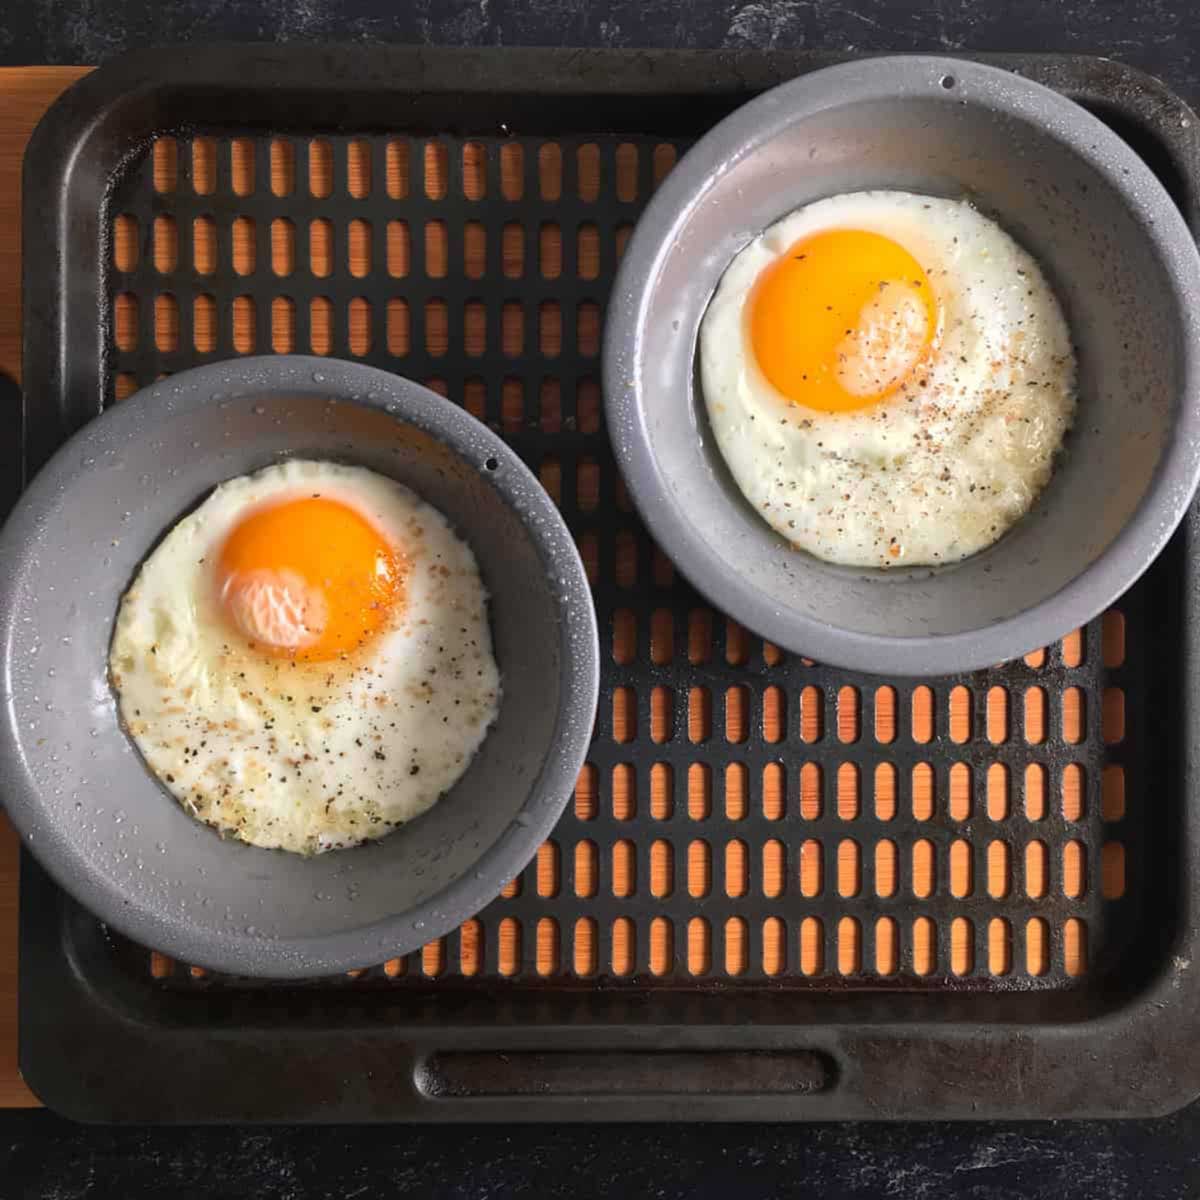 https://twohealthykitchens.com/wp-content/uploads/2022/08/Fried-Eggs-in-Air-Fryer.jpg